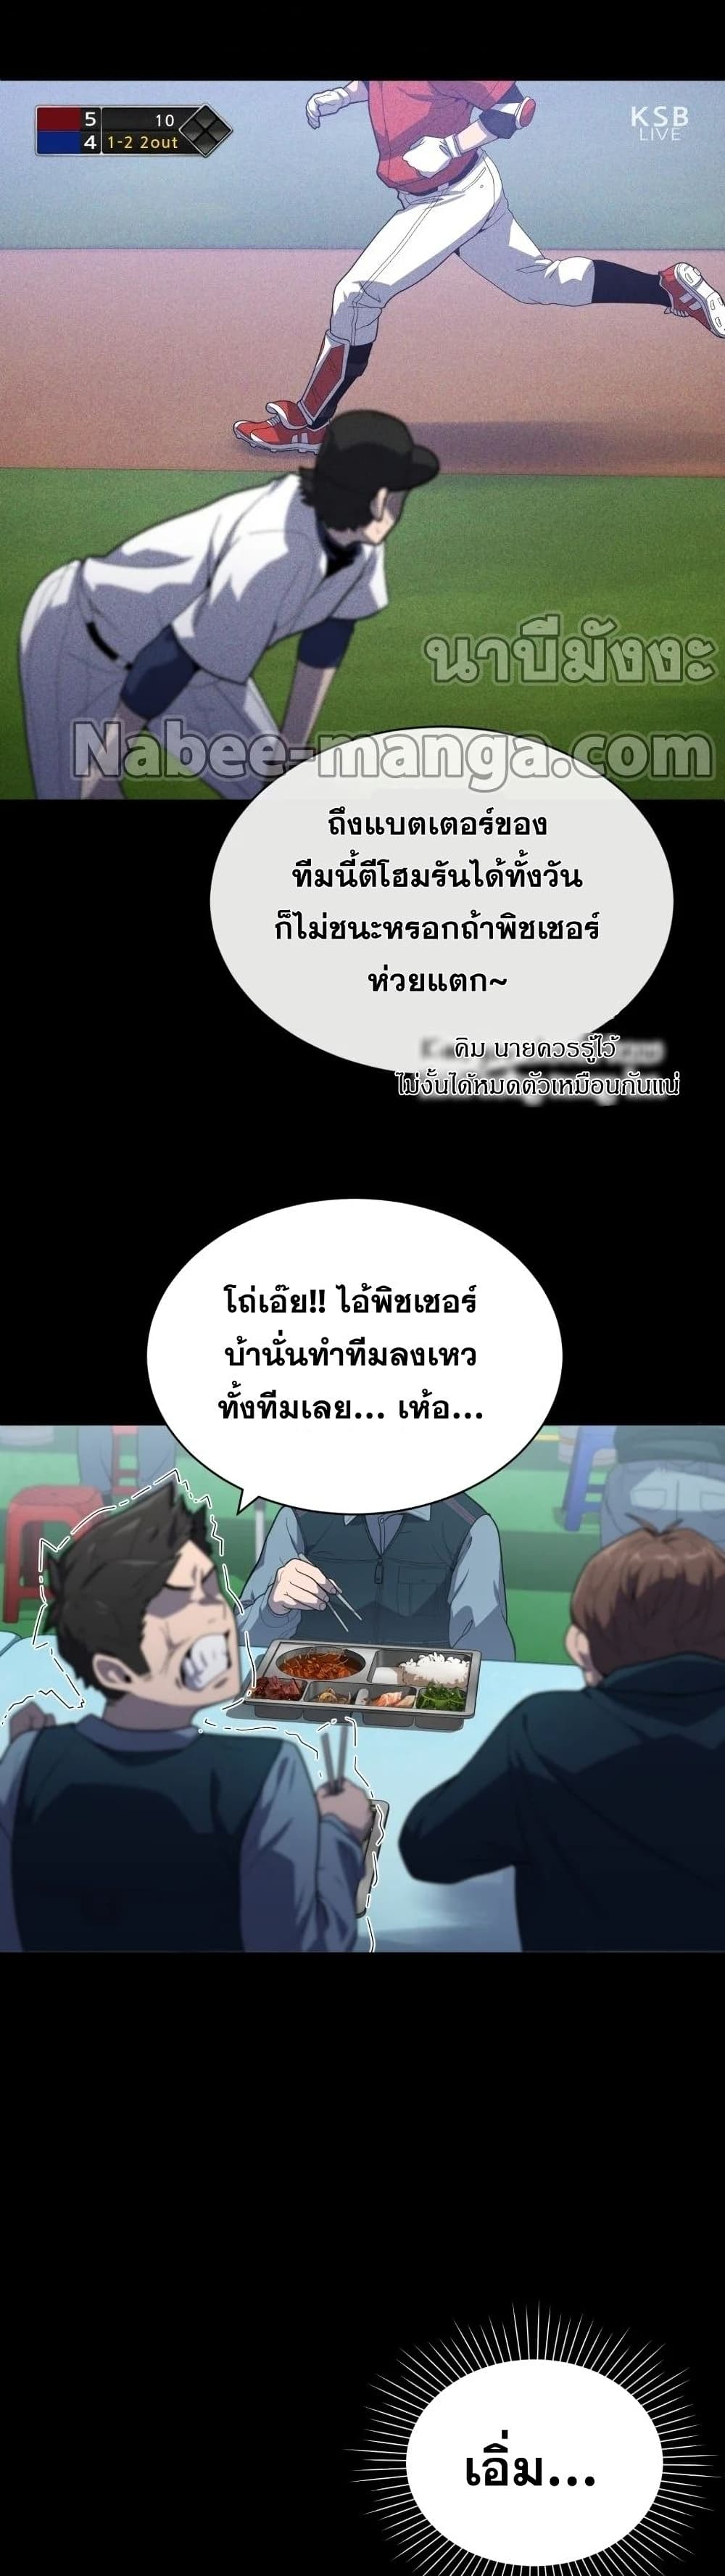 King of the Mound ตอนที่ 17 (4)